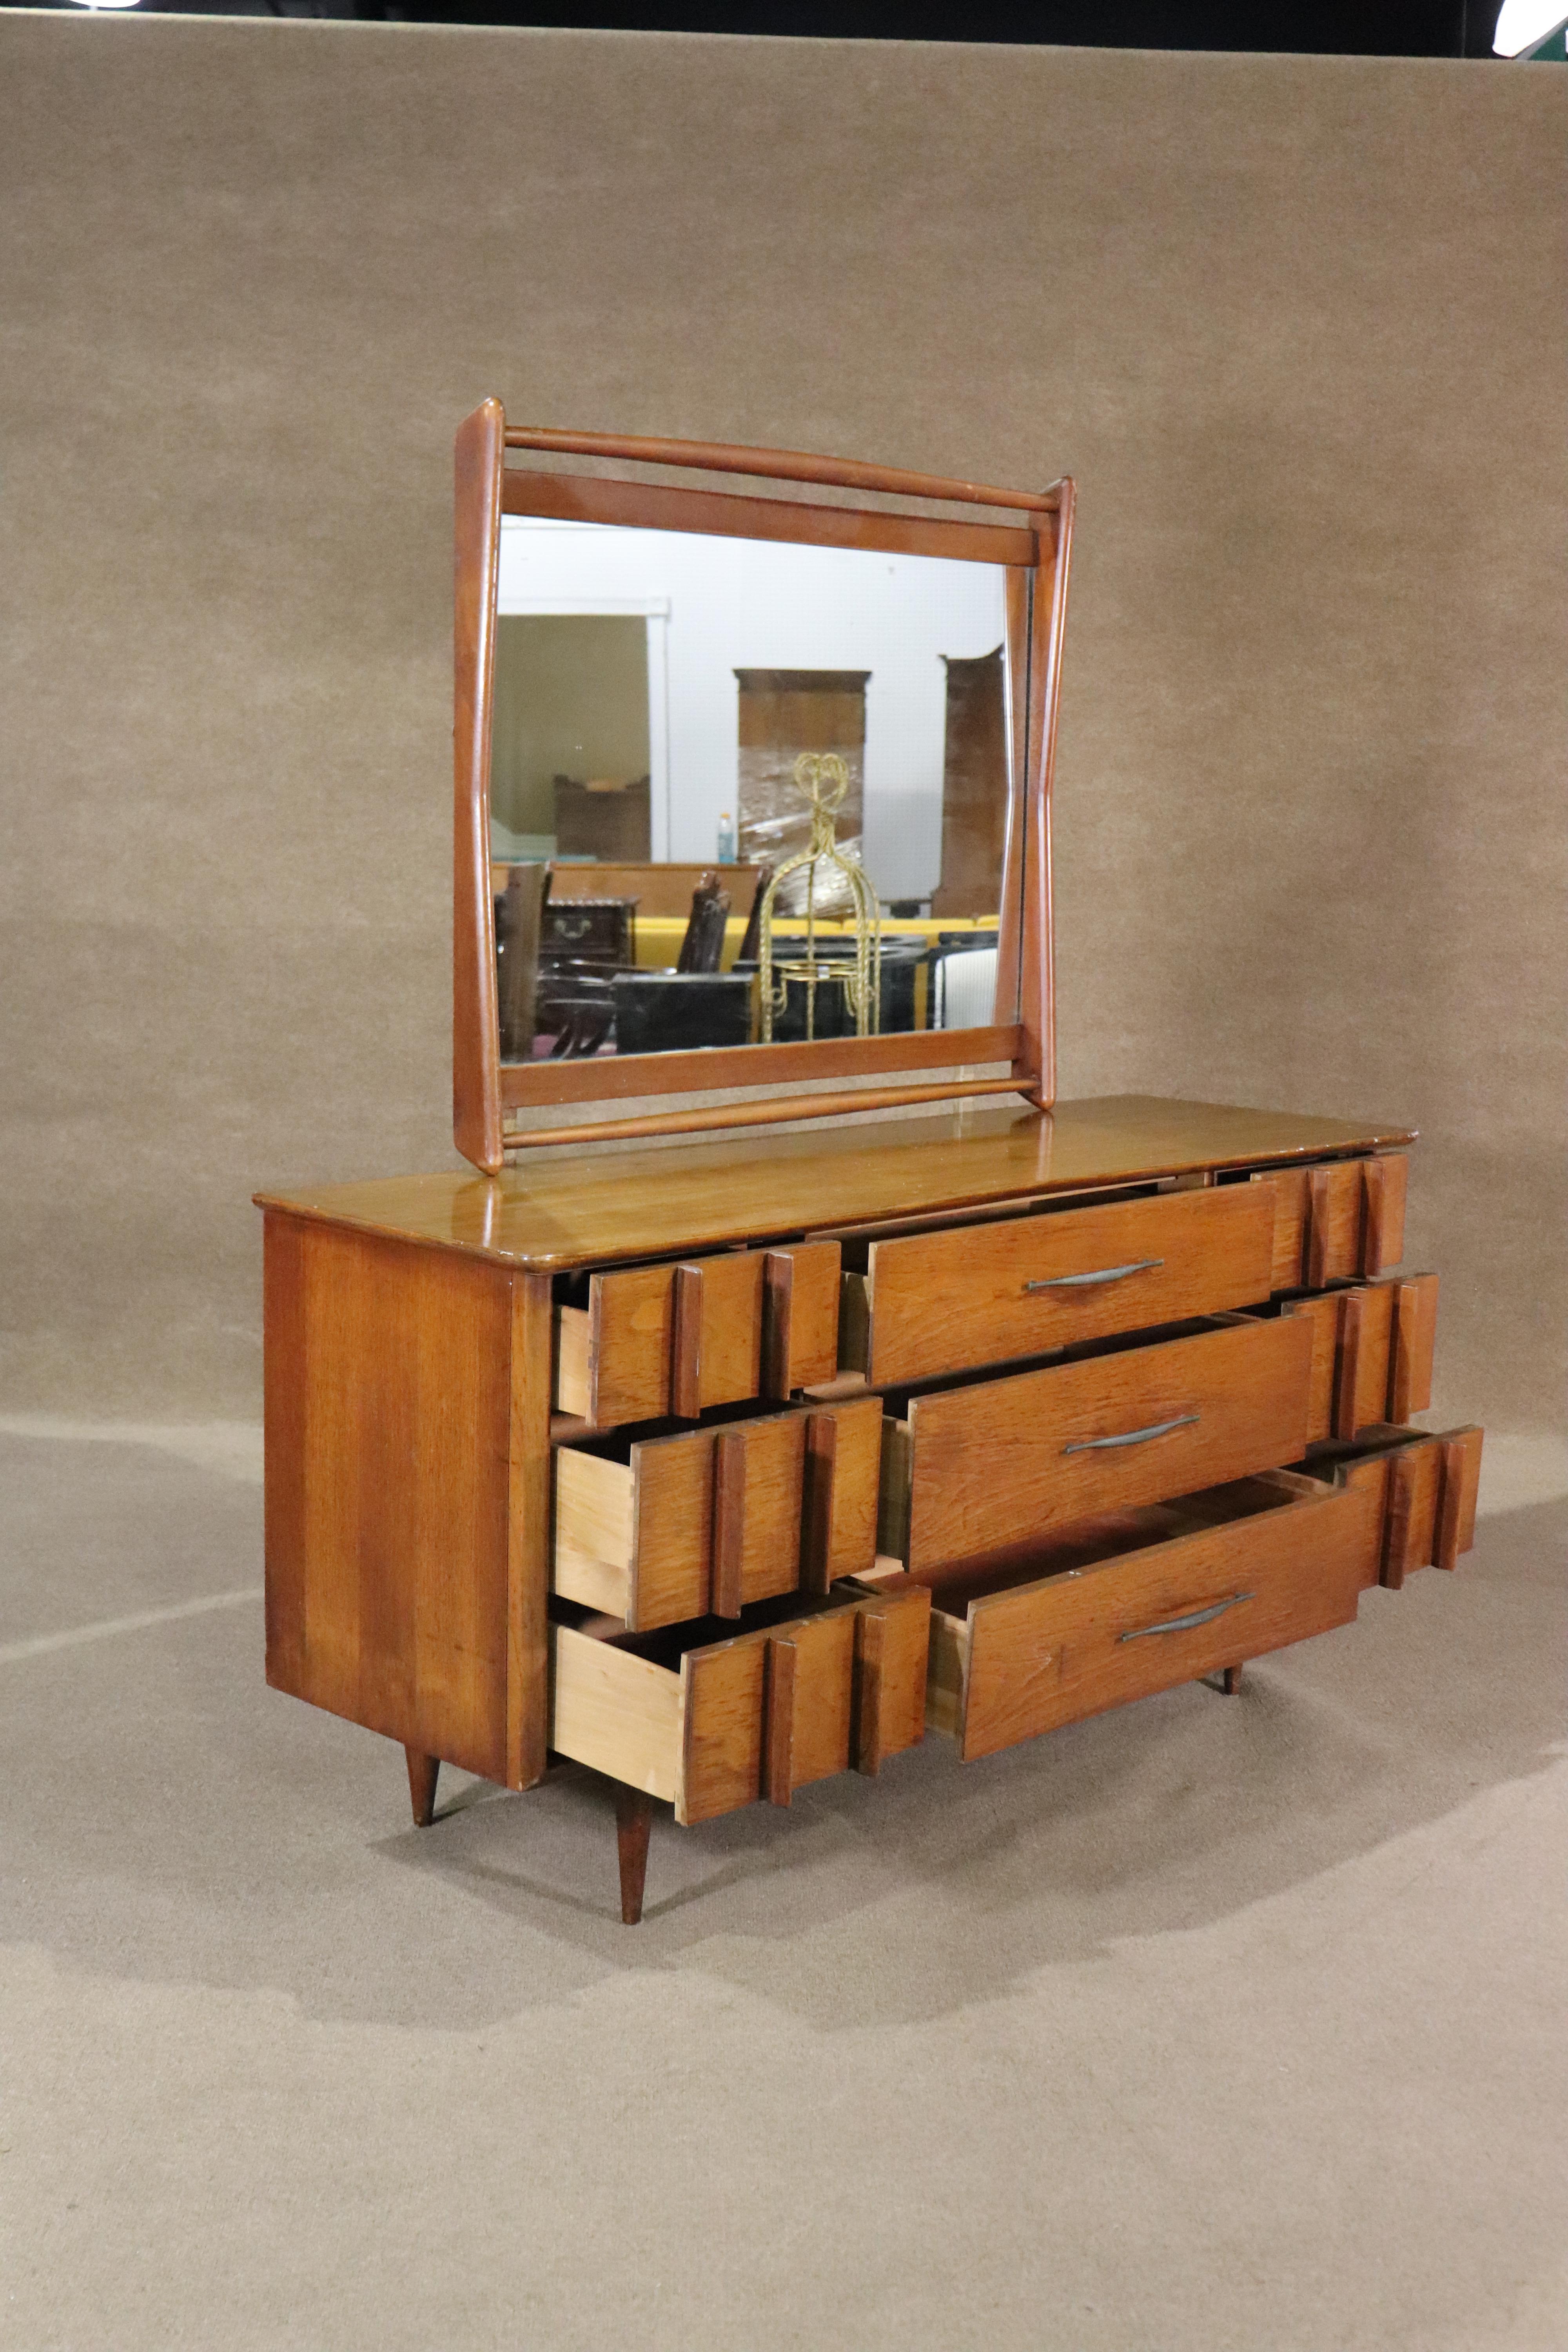 Vintage modern American made dresser with mirror. Made by Kent Coffey for their 'Foreteller' collection. Nine drawers with sculpted legs and runner.
Mirror: 35h, 41.5w
Please confirm location NY of NJ.